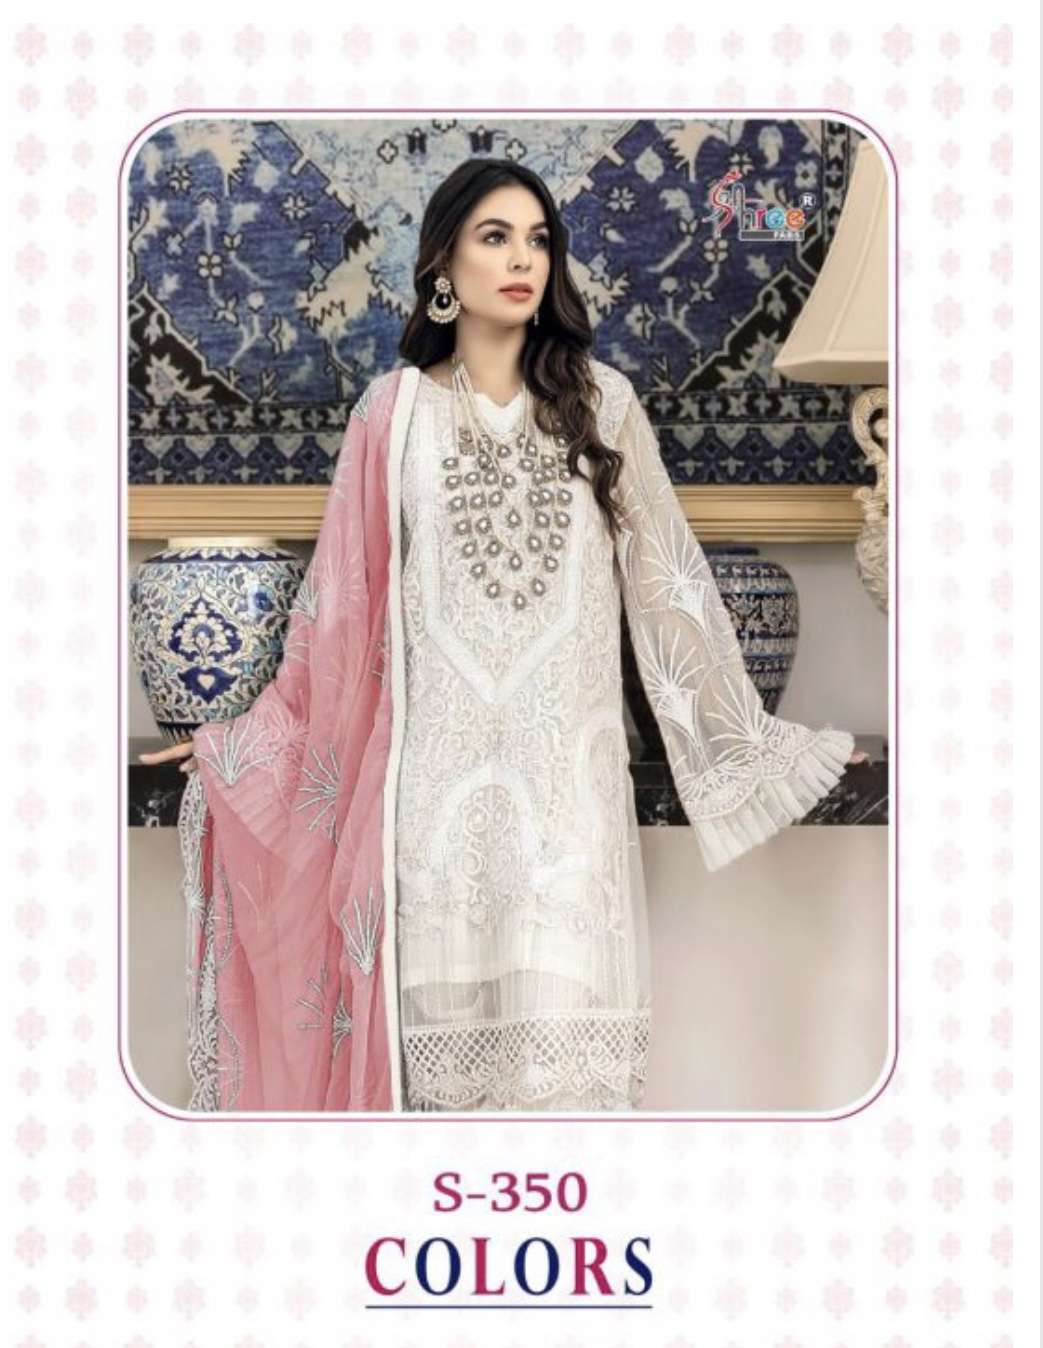 SHREE FABS PRESENTS S 350 COLORS NET WITH EMBROIDERY WHOLESALE PAKISTANI SUITS